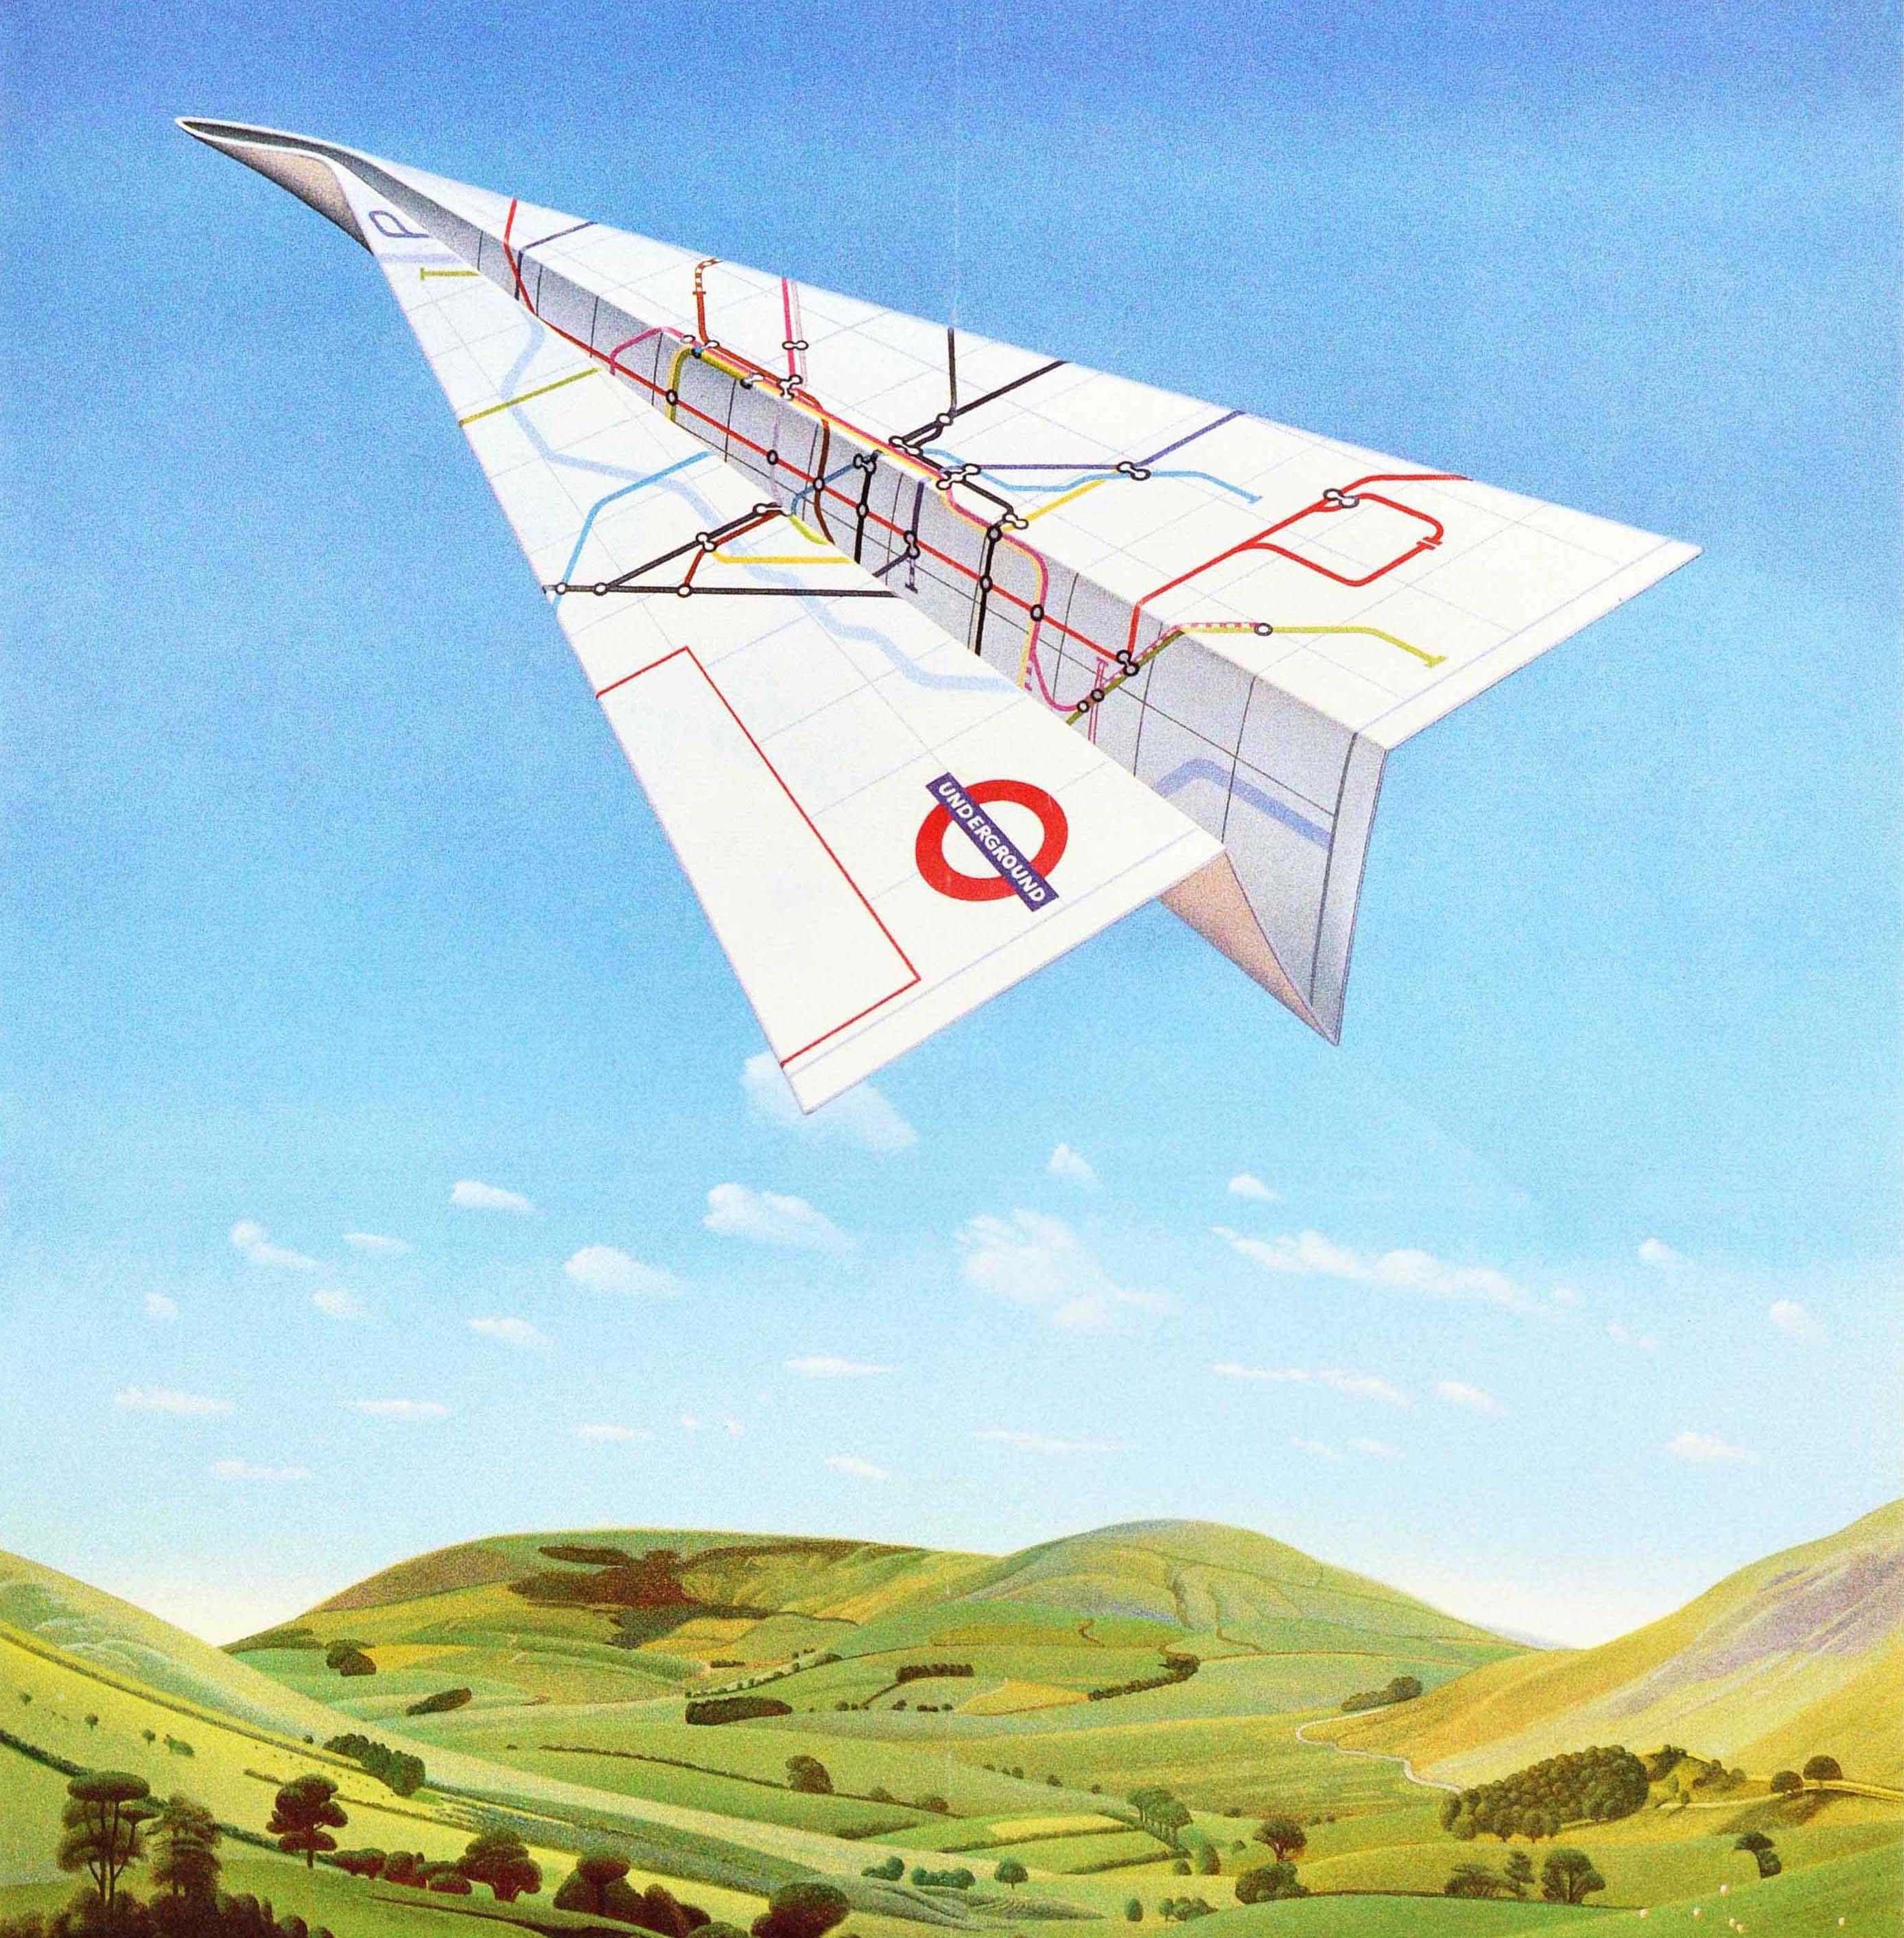 Original vintage London Transport poster encouraging travel via the Underground to Heathrow airport - Fly the Tube to Heathrow - featuring a great design depicting an origami folded tube map as a plane with the London Underground visible on the wing